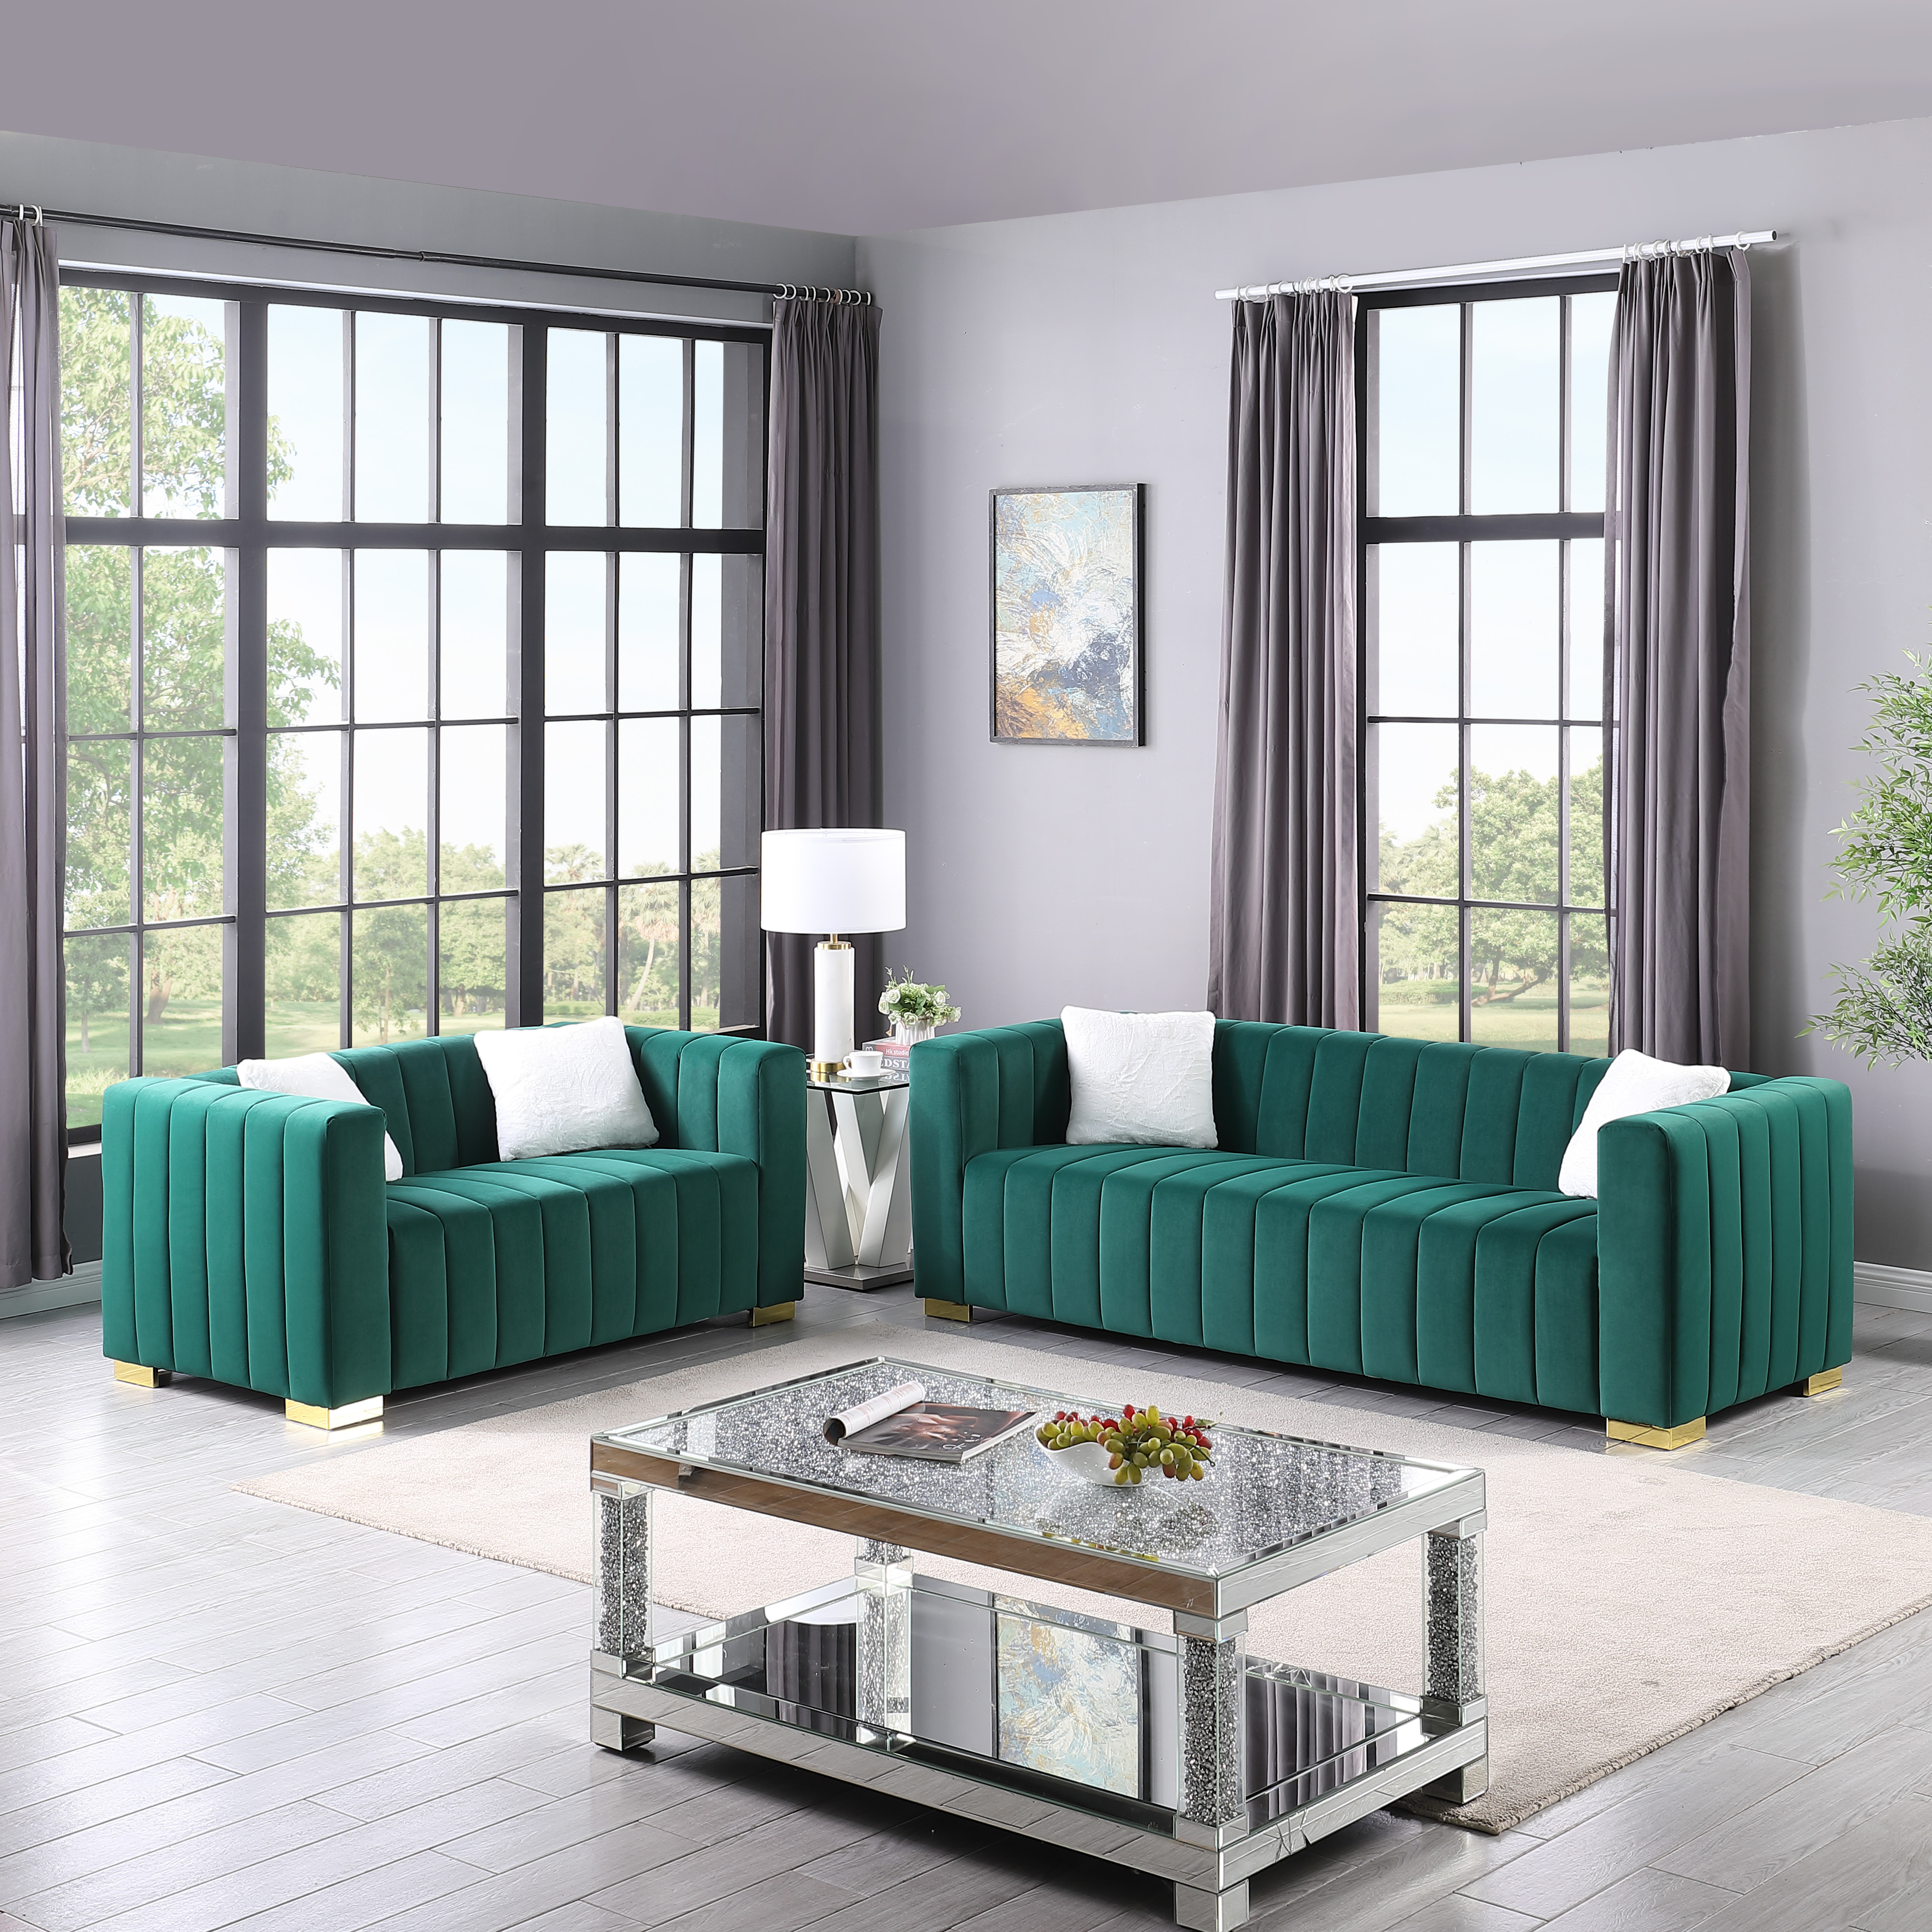 87" big size sofa,A modern  channel sofa  take on a traditional Chesterfield,Dark Green color,3 Seater and love seater